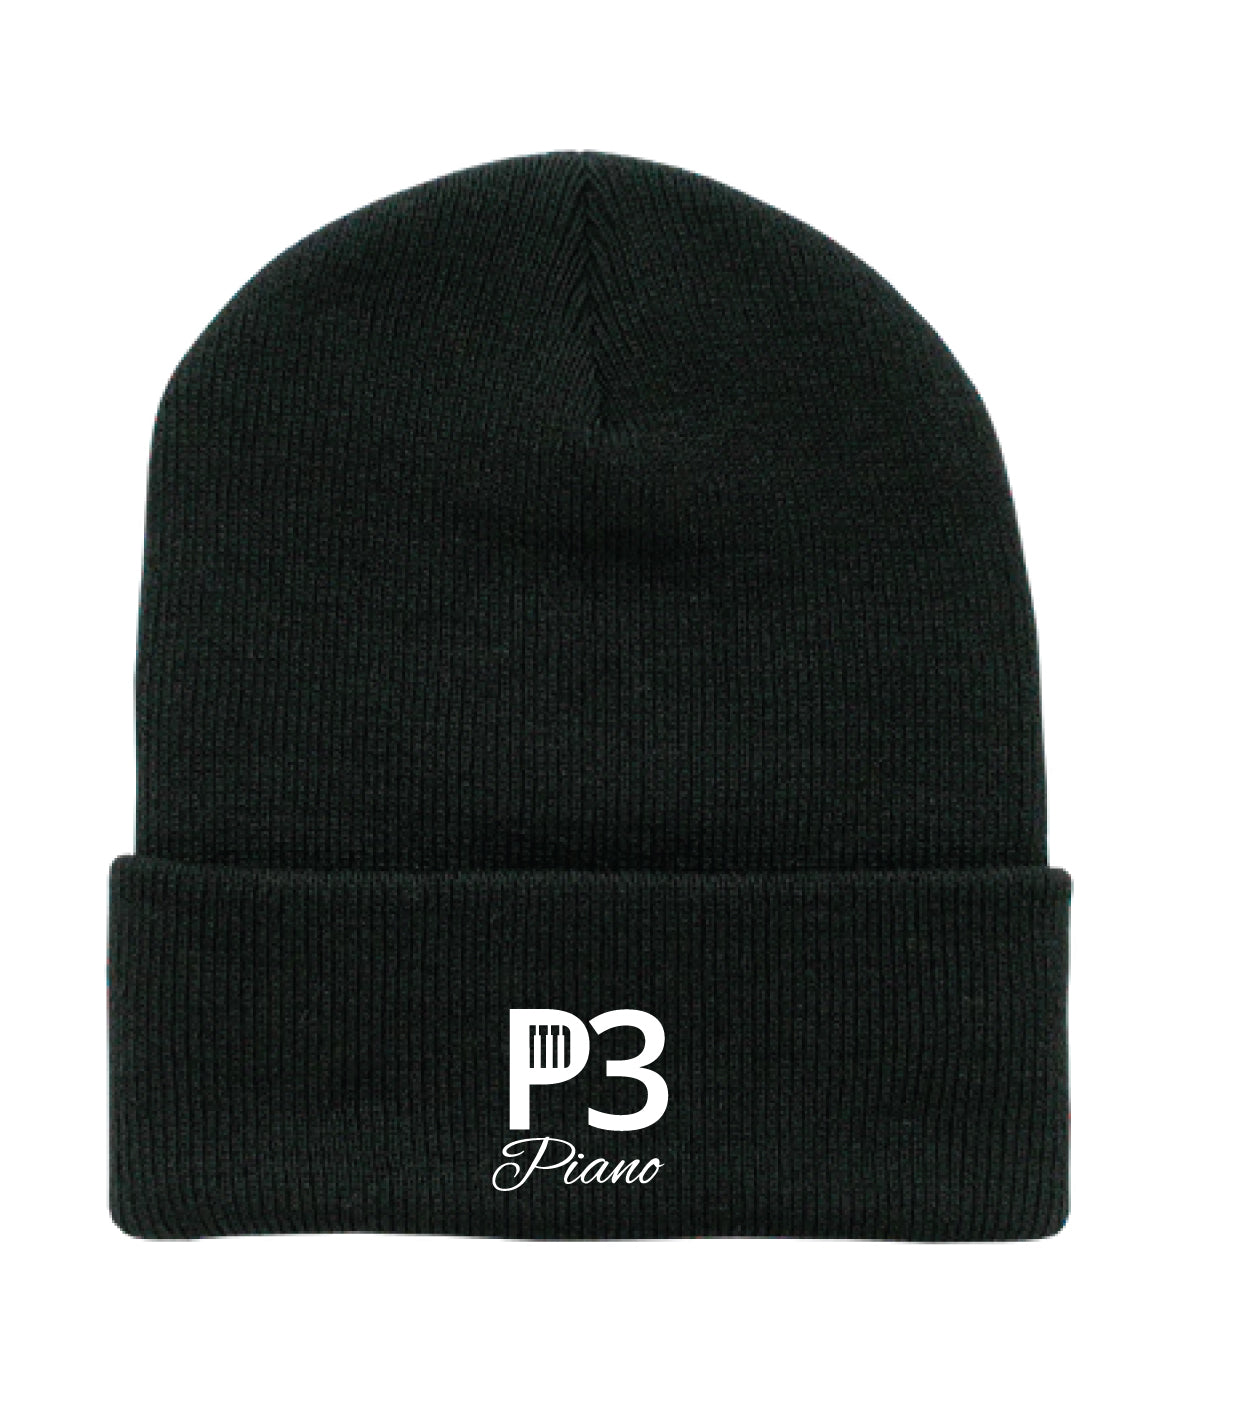 Black P3 Piano Embroidered Decky Beanies